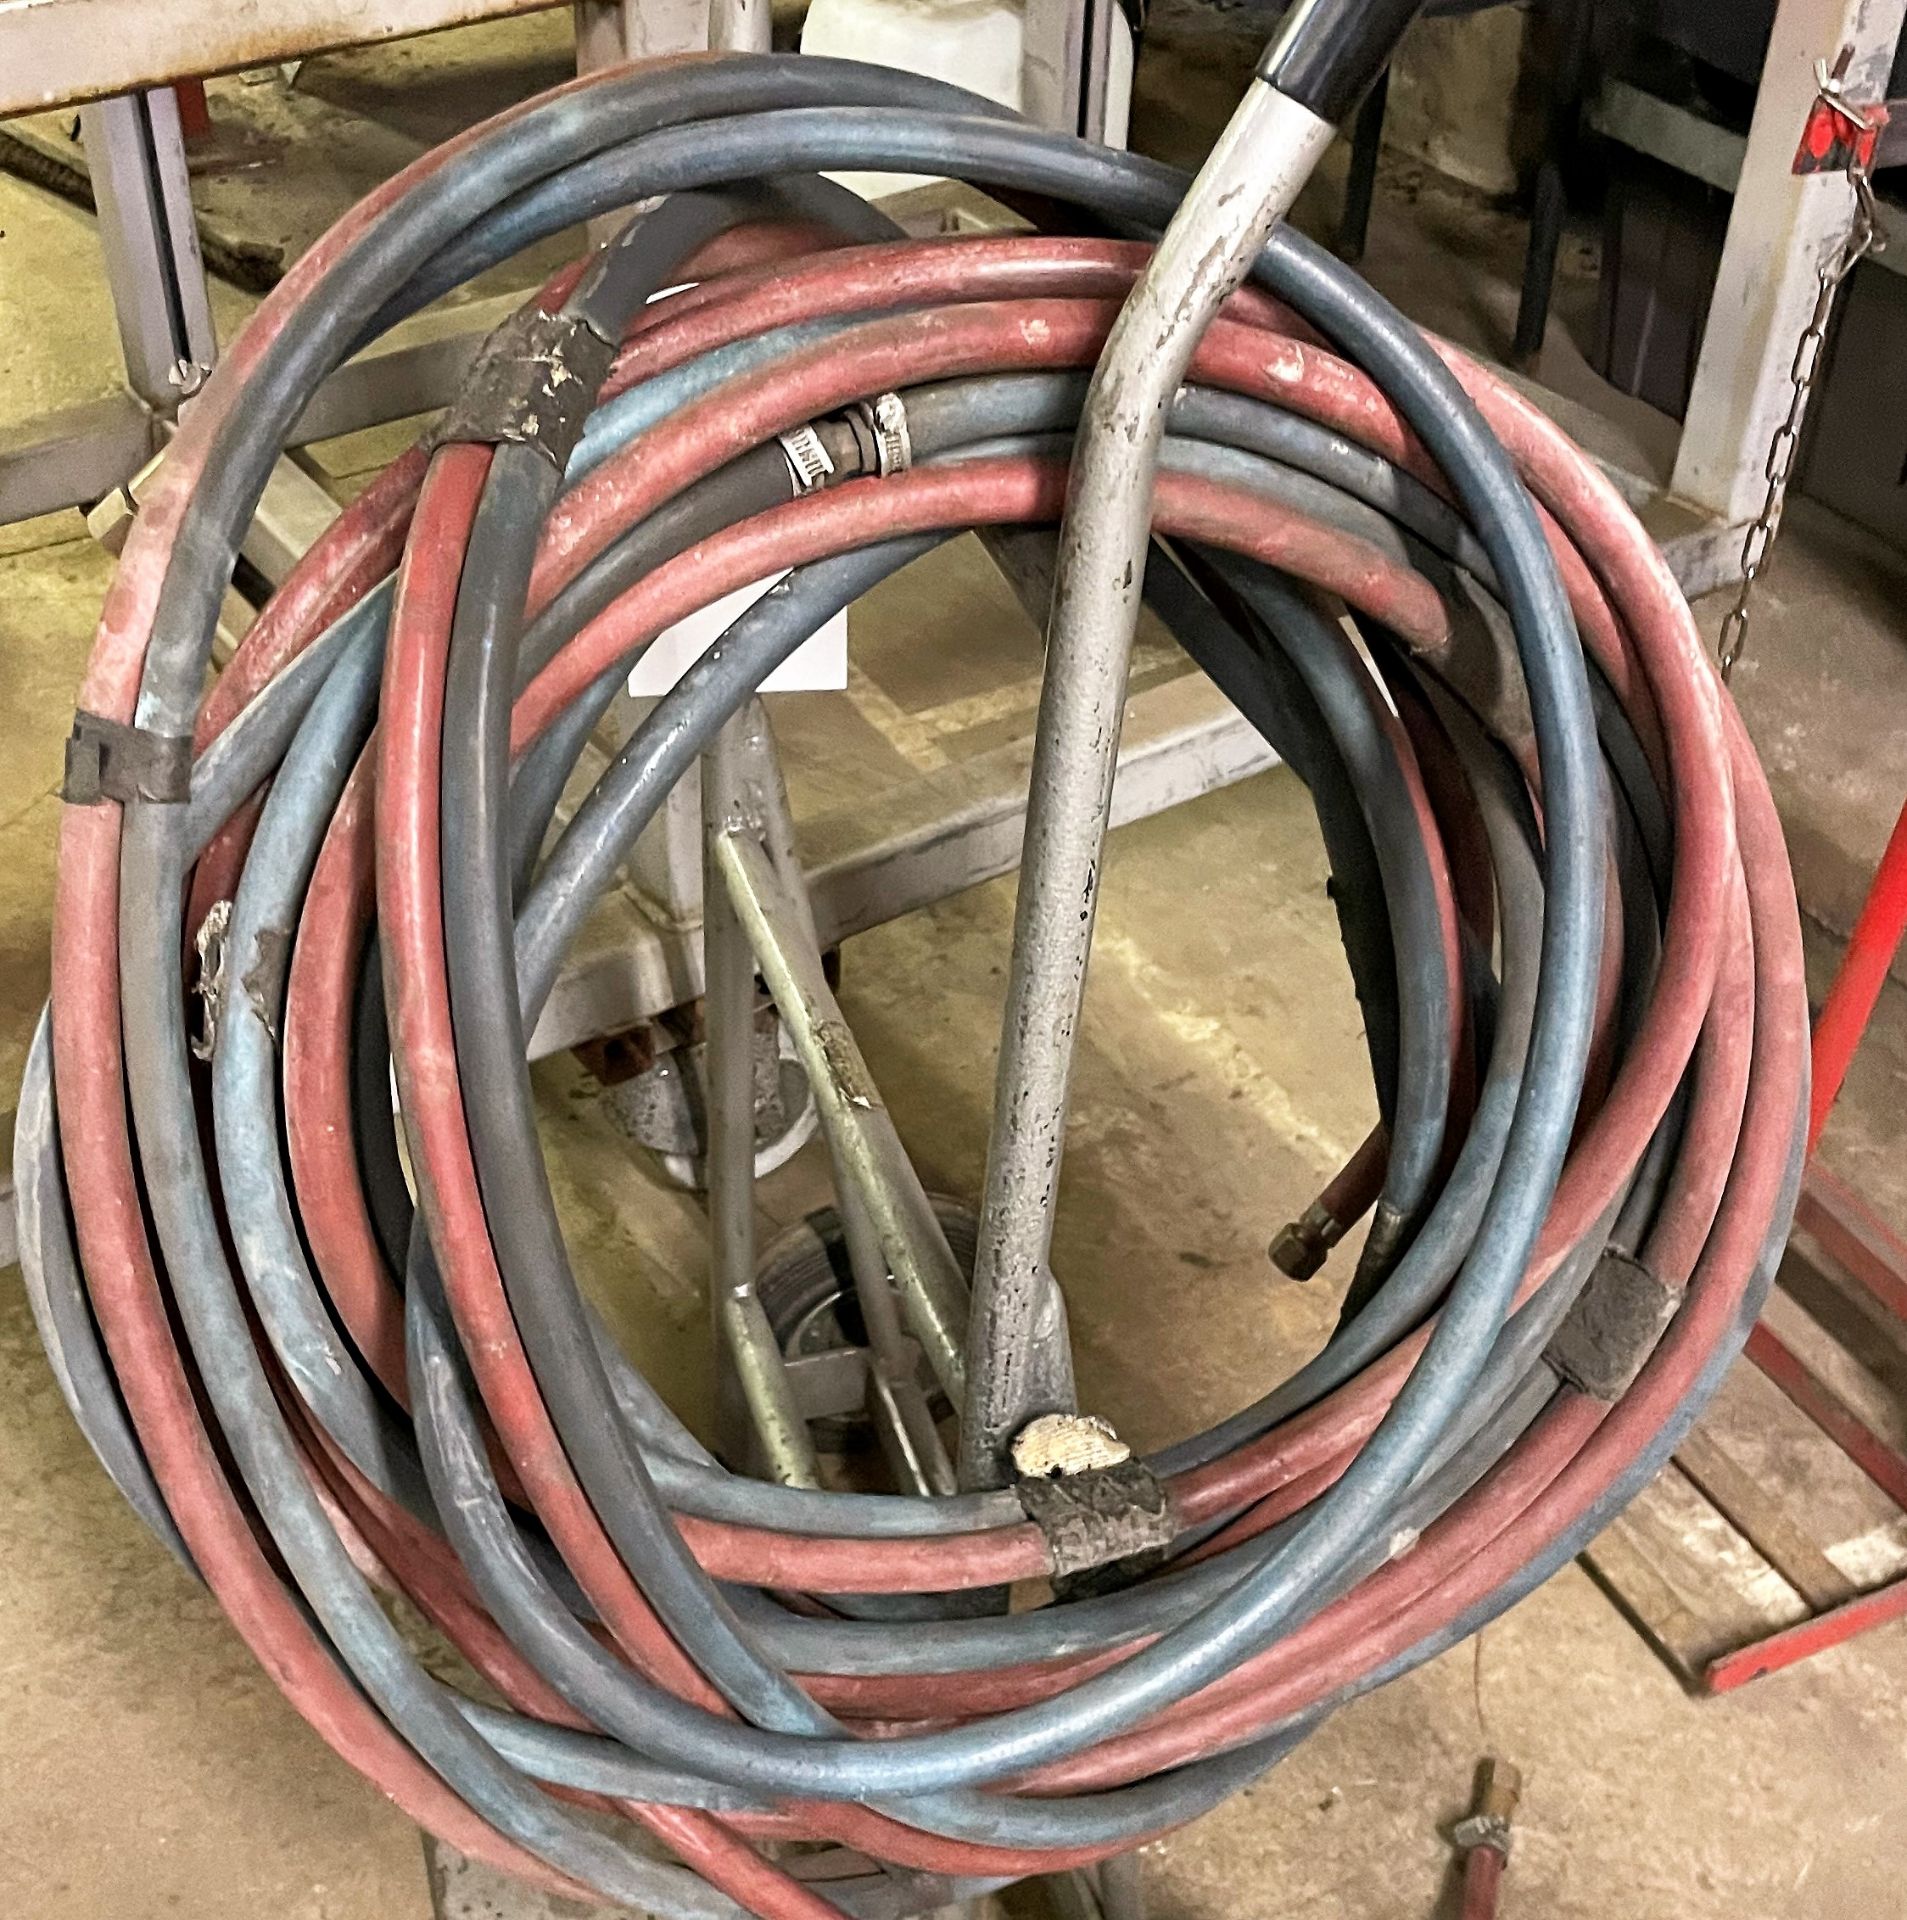 A Set of Oxyacetylene Cutting Gear with Gauges, Cutting Torch, Long and Short Hoses, Trolley. - Image 3 of 3